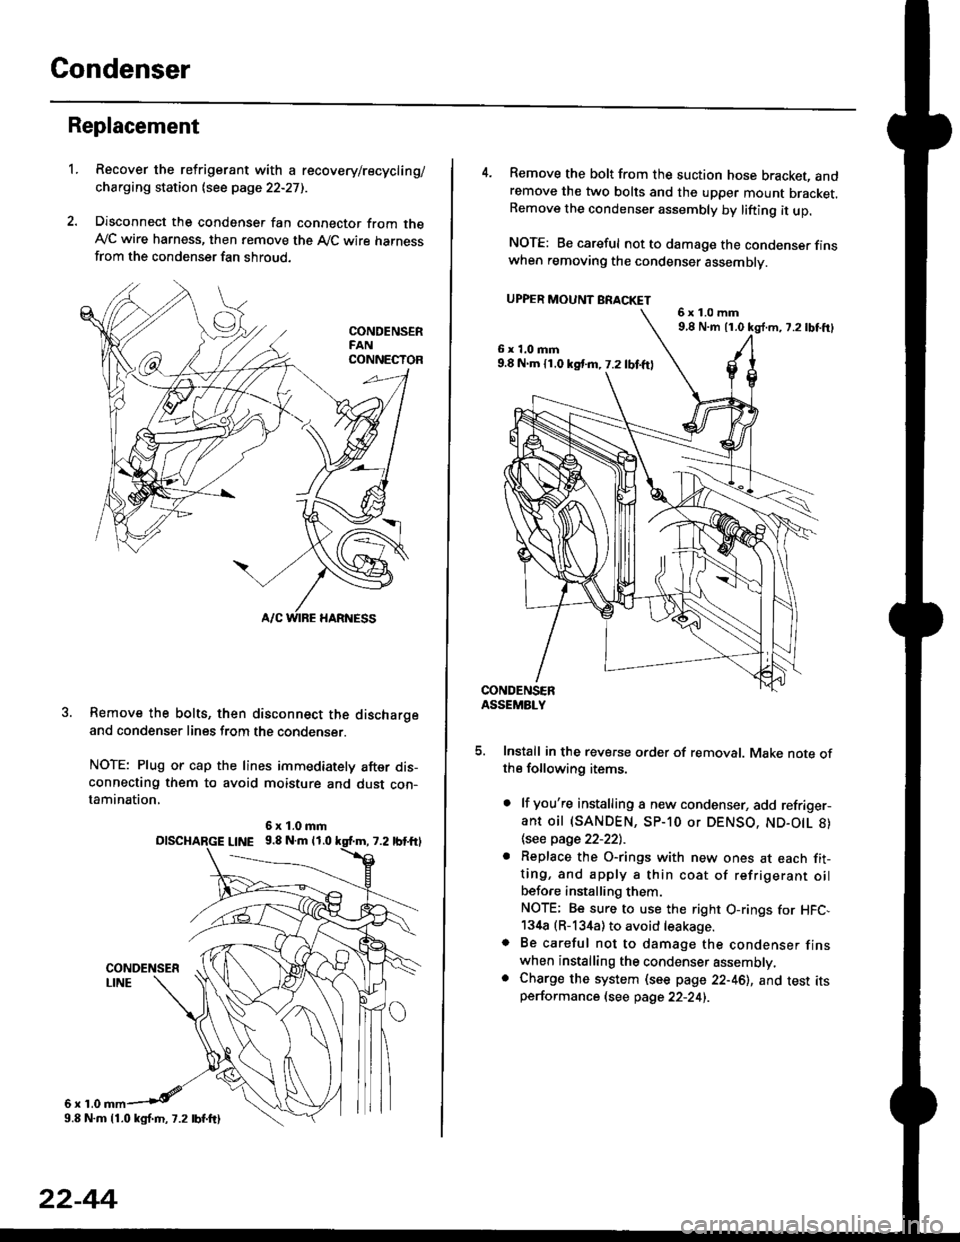 HONDA CIVIC 1999 6.G User Guide Condenser
Replacement
1.Recover the refrigerant with a recovery/recycling/
charging station lsee page 22-271.
Disconnect the condenser fan connector from theAyC wire harness, then remove the A,/C wir